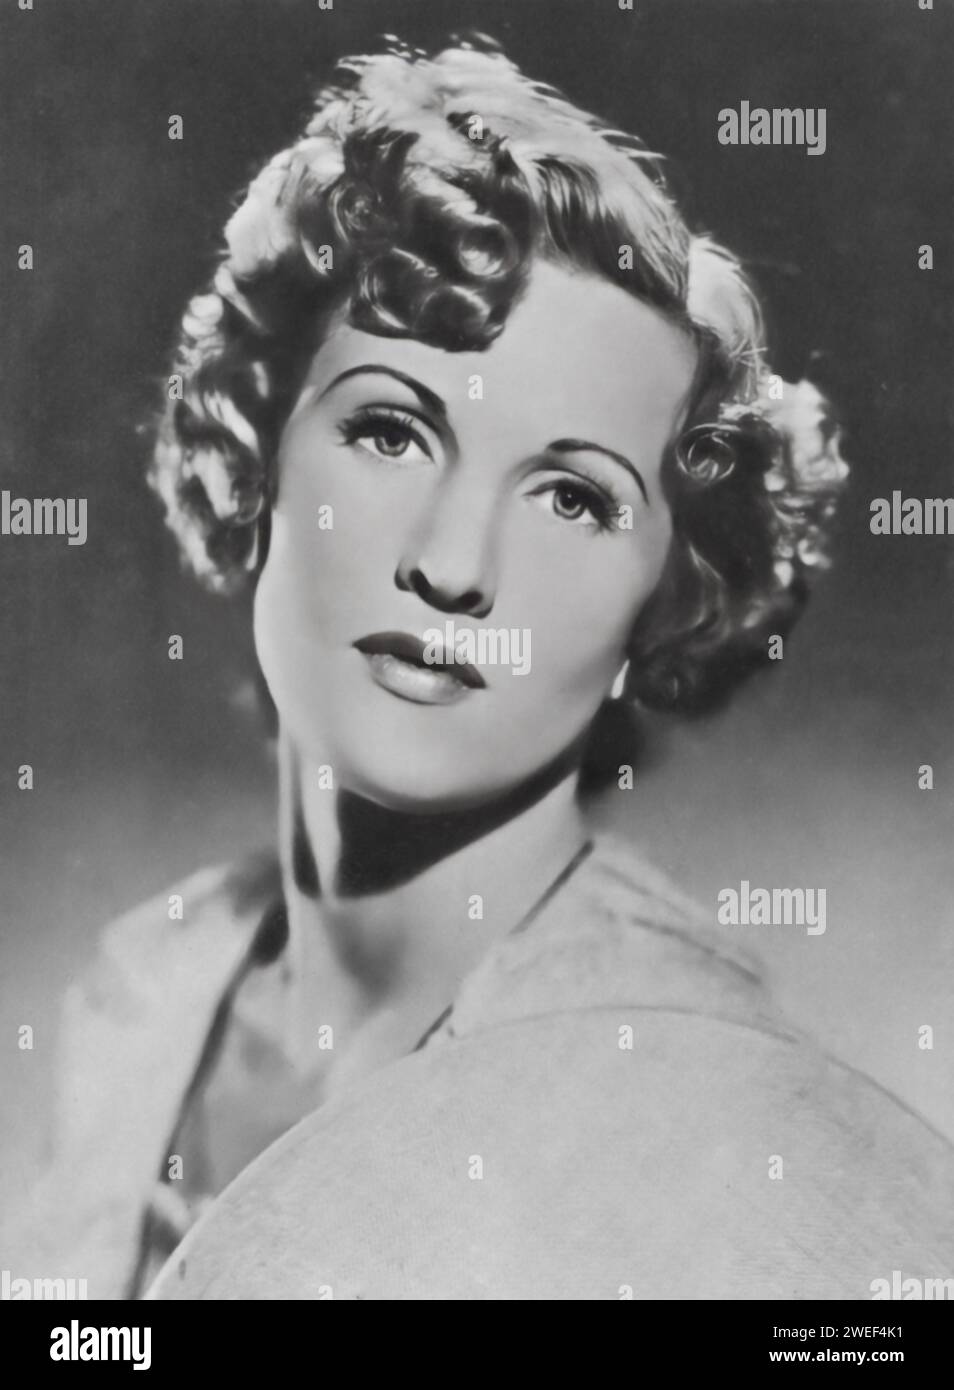 A portrait of Anne Crawford, an actress celebrated for her role in the film 'They Were Sisters' (1945). In this British drama, Crawford portrays Vera, one of three sisters, each facing their own struggles and challenges in life. Her character deals with the complexities of a troubled marriage, showcasing Crawford's skill in portraying nuanced and emotionally charged roles. Stock Photo